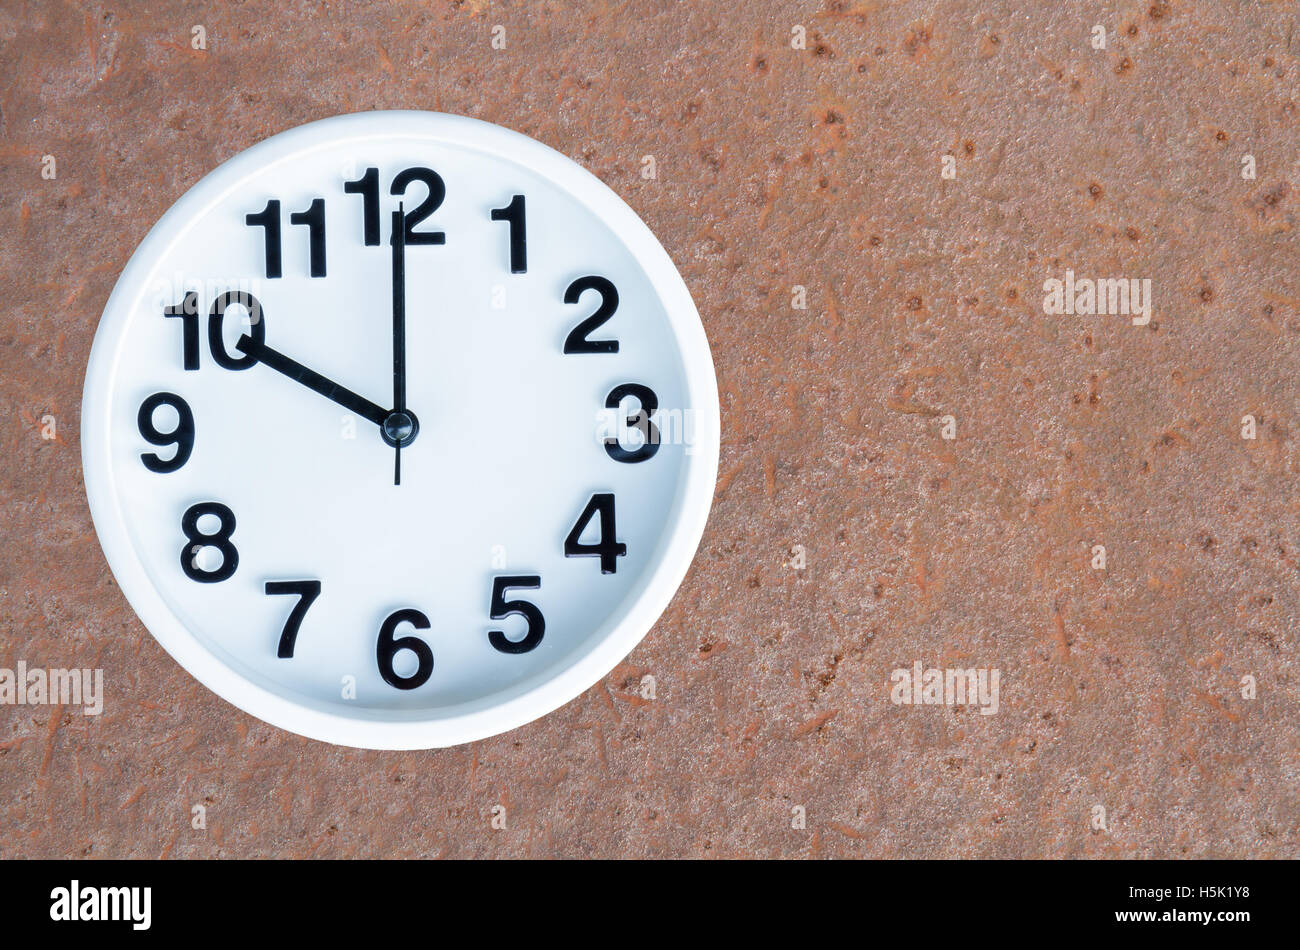 https://c8.alamy.com/comp/H5K1Y8/clock-show-10-am-or-pm-on-steel-rusty-background-with-copy-space-clipping-H5K1Y8.jpg